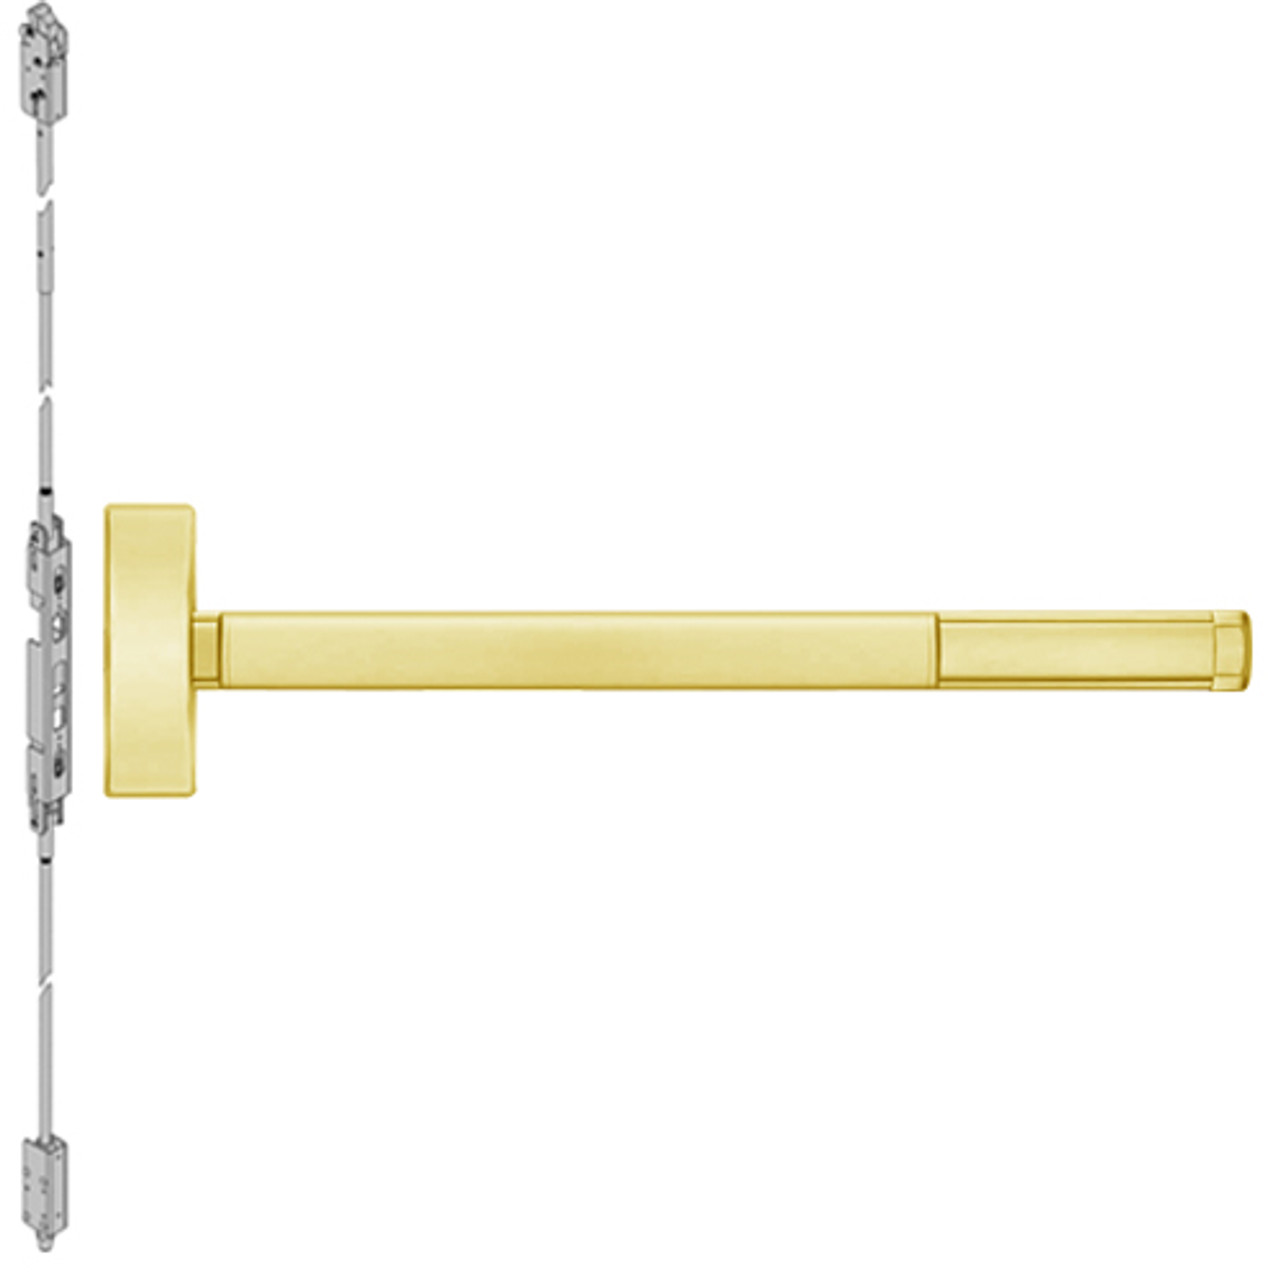 TS2801-605-36 PHI 2800 Series Concealed Vertical Rod Exit Device with Touchbar Monitoring Switch Prepped for Cover Plate in Bright Brass Finish